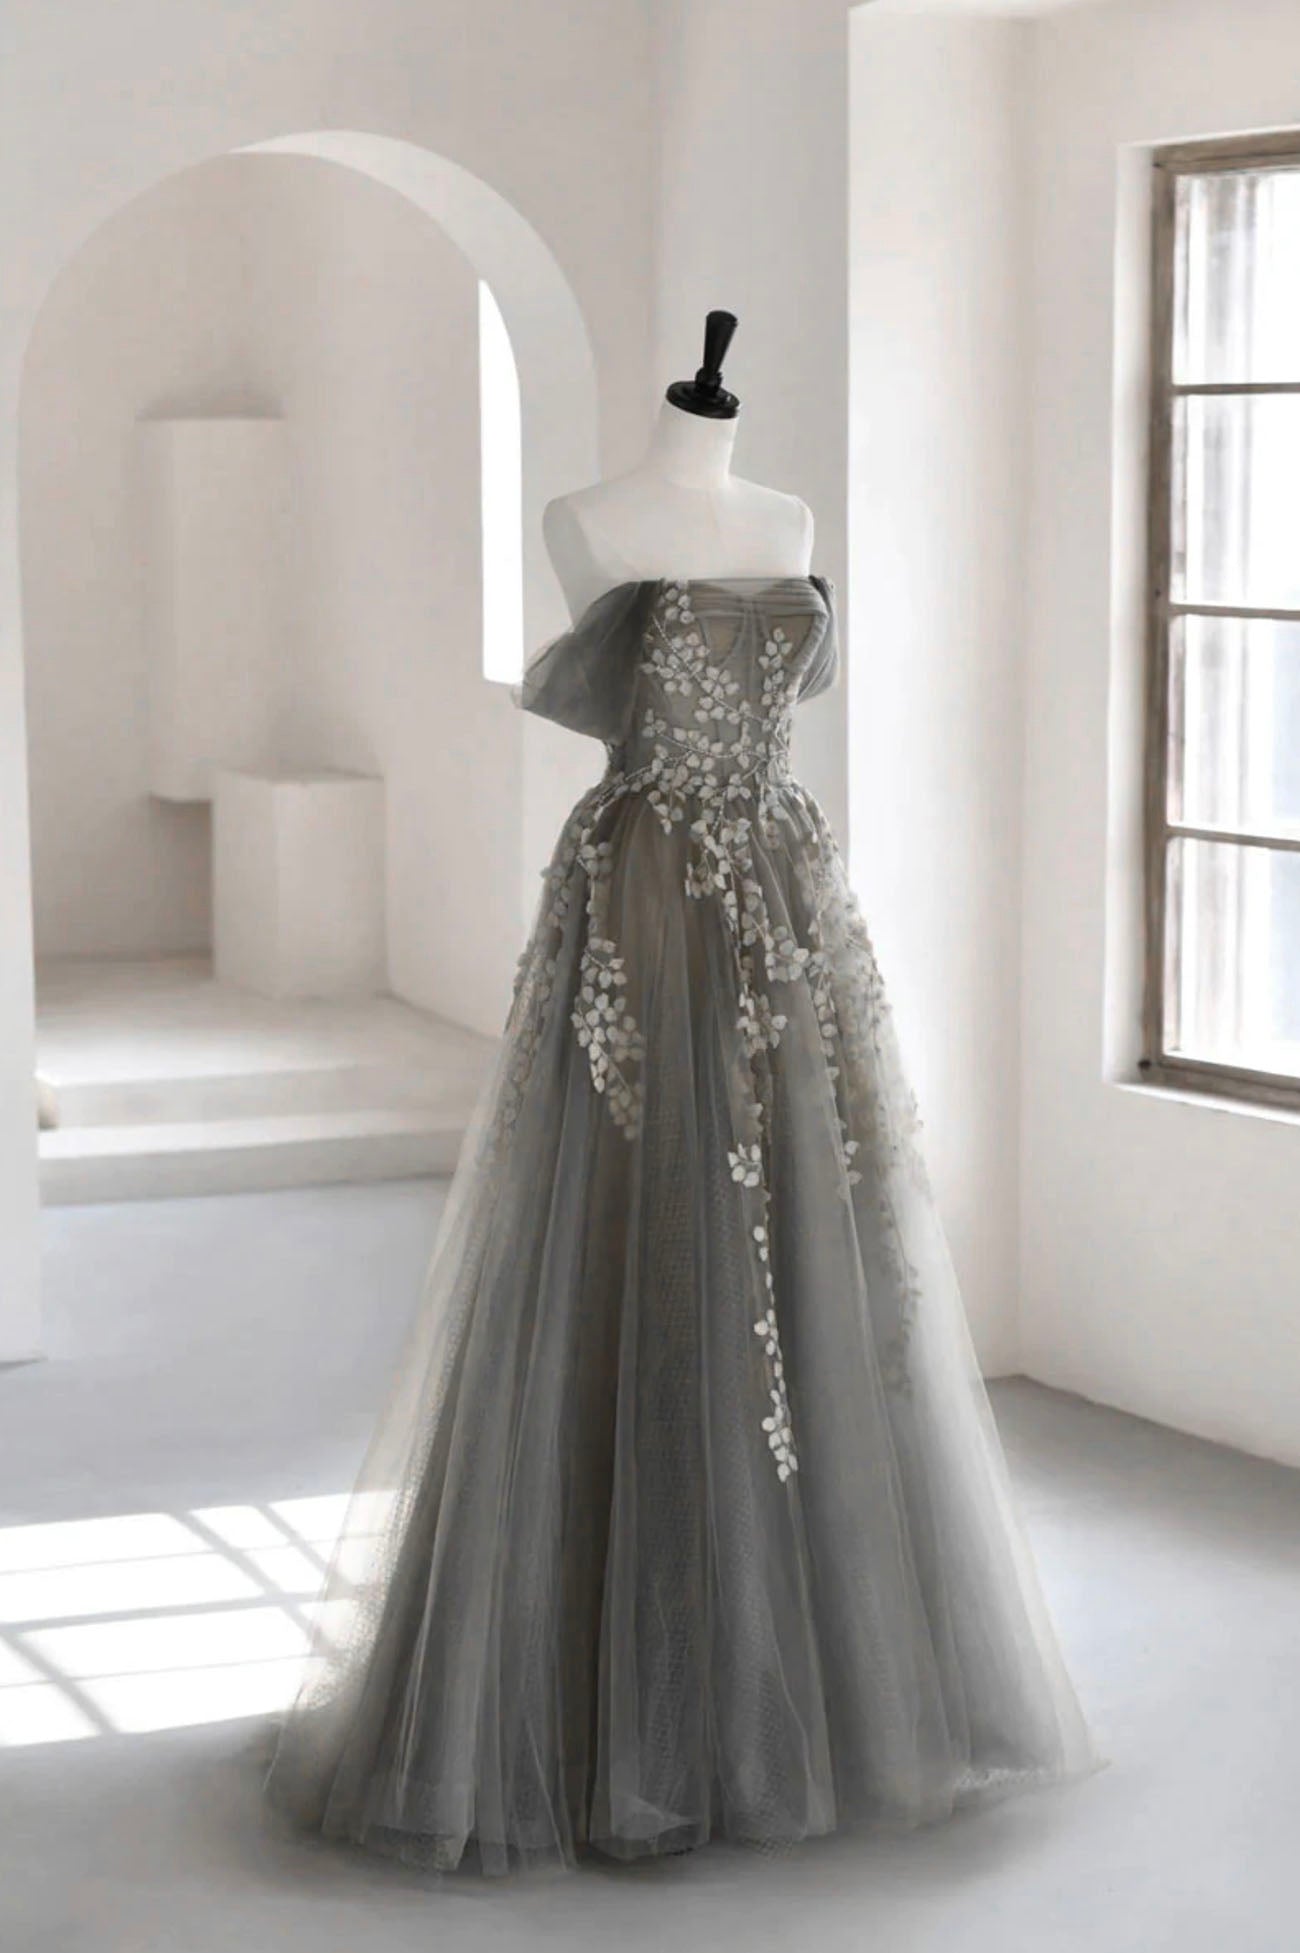 Gray Tulle Lace Long Corset Prom Dress, A-Line Off the Shoulder Evening Dress outfit, Prom Dress Designs